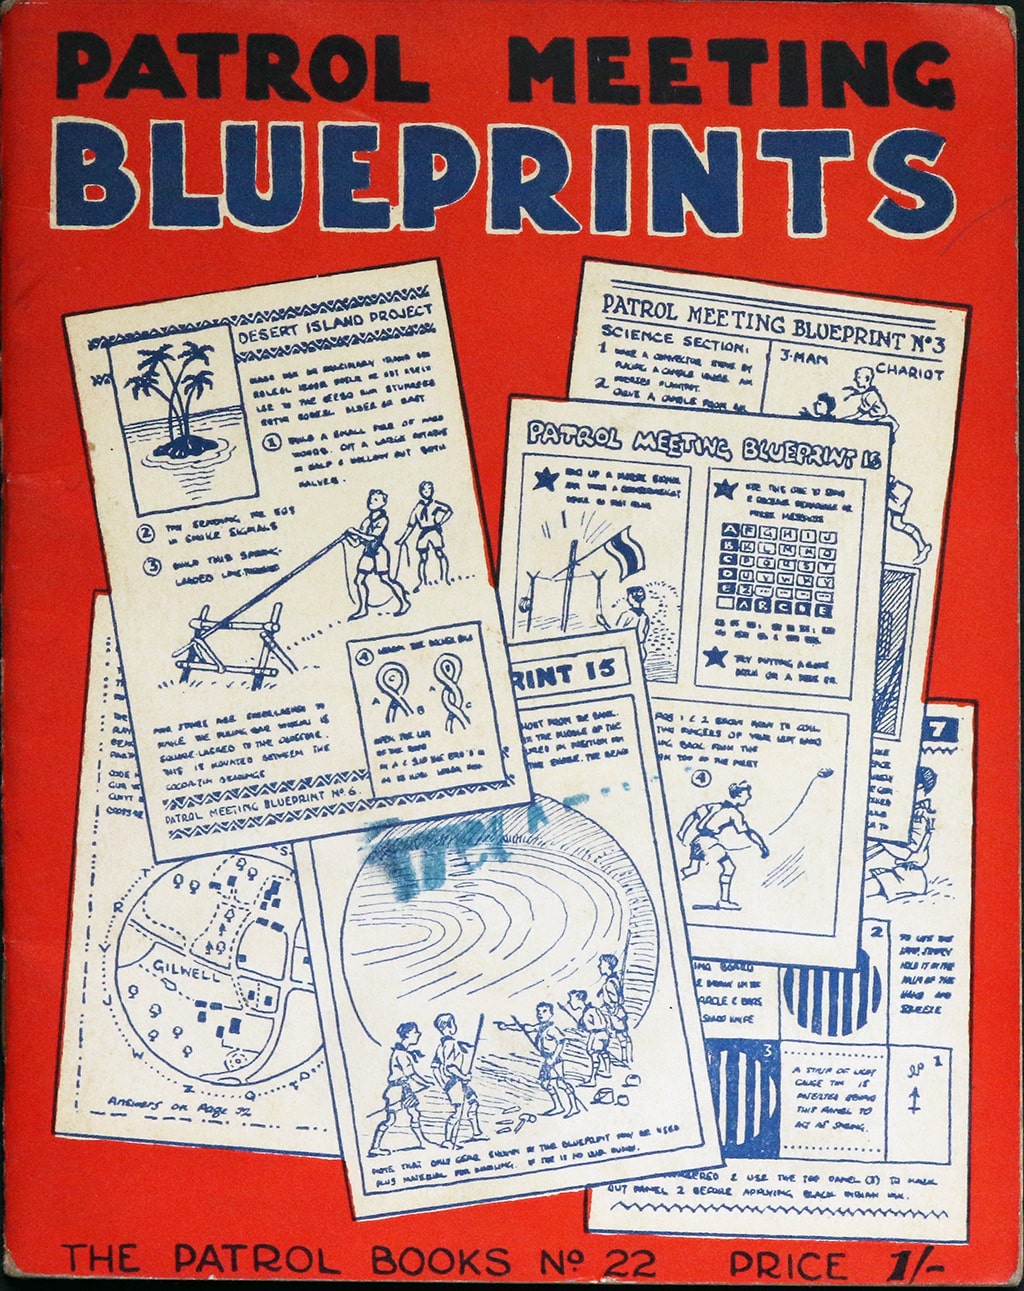 Front cover of Patrol Meeting Blueprints - The Patrol Books number 22. It shows examples of inner pages on the cover.